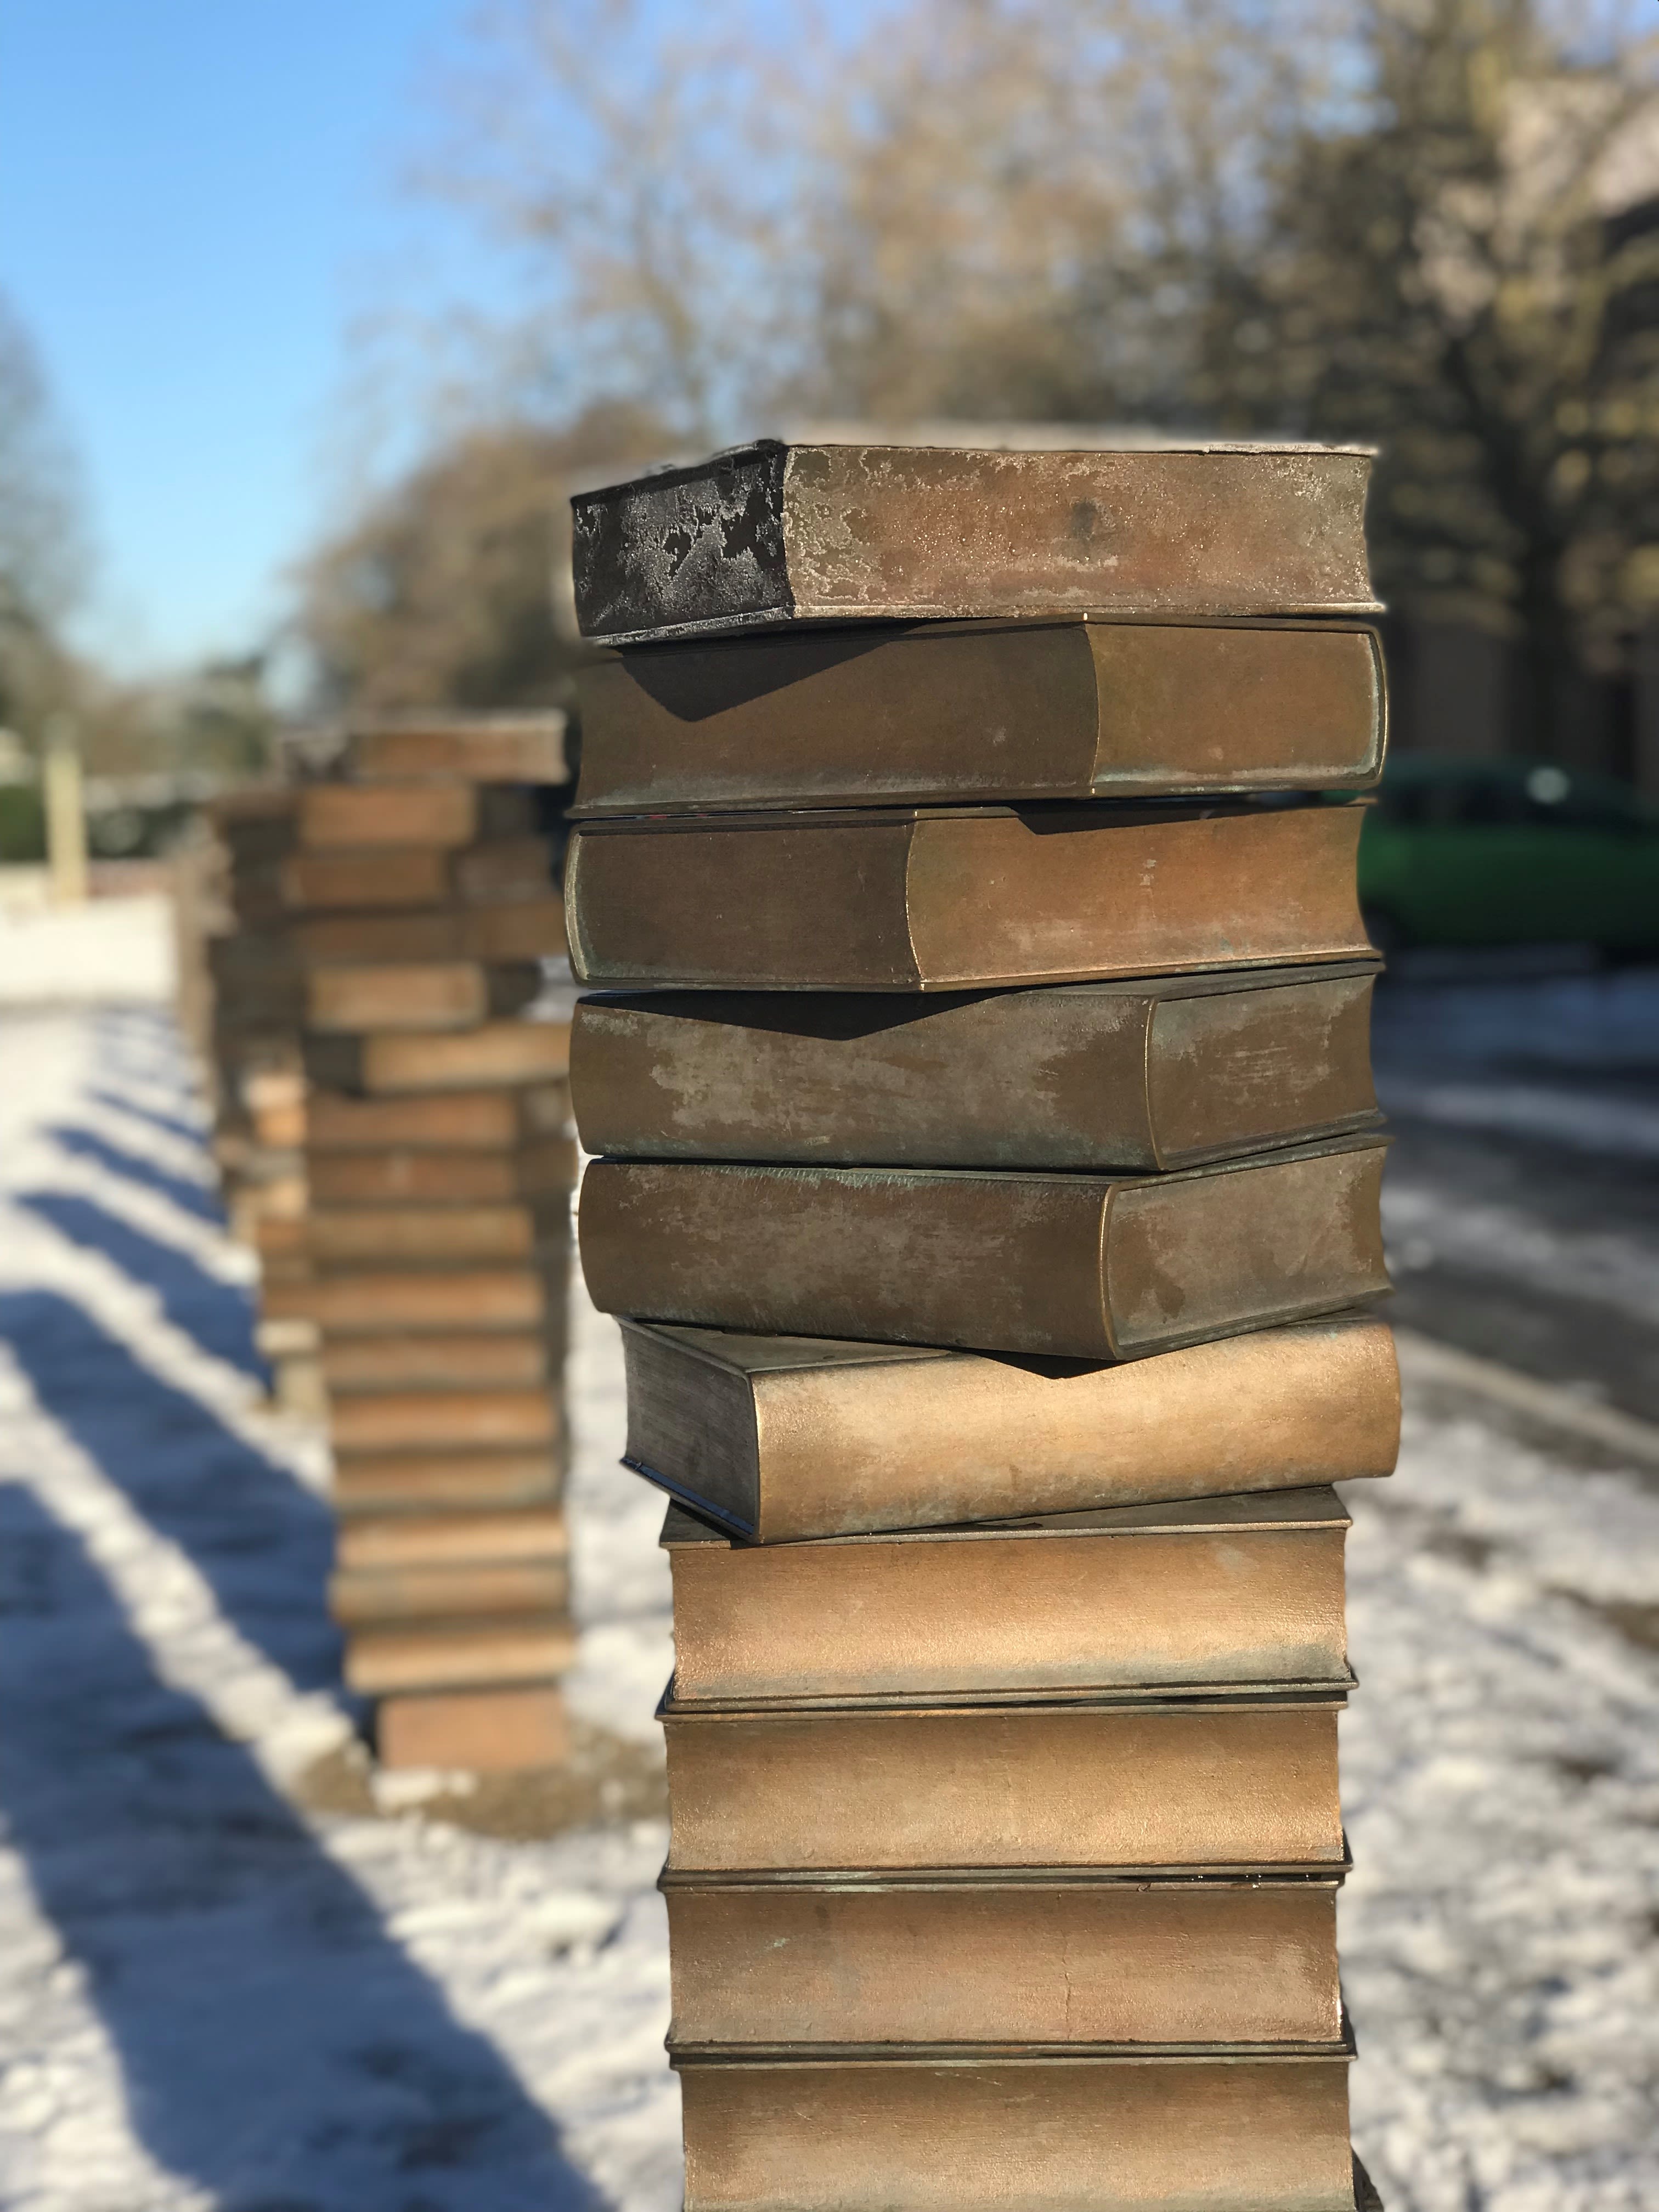 The frosty bookstack sculptures in front of the library reflect sunshine